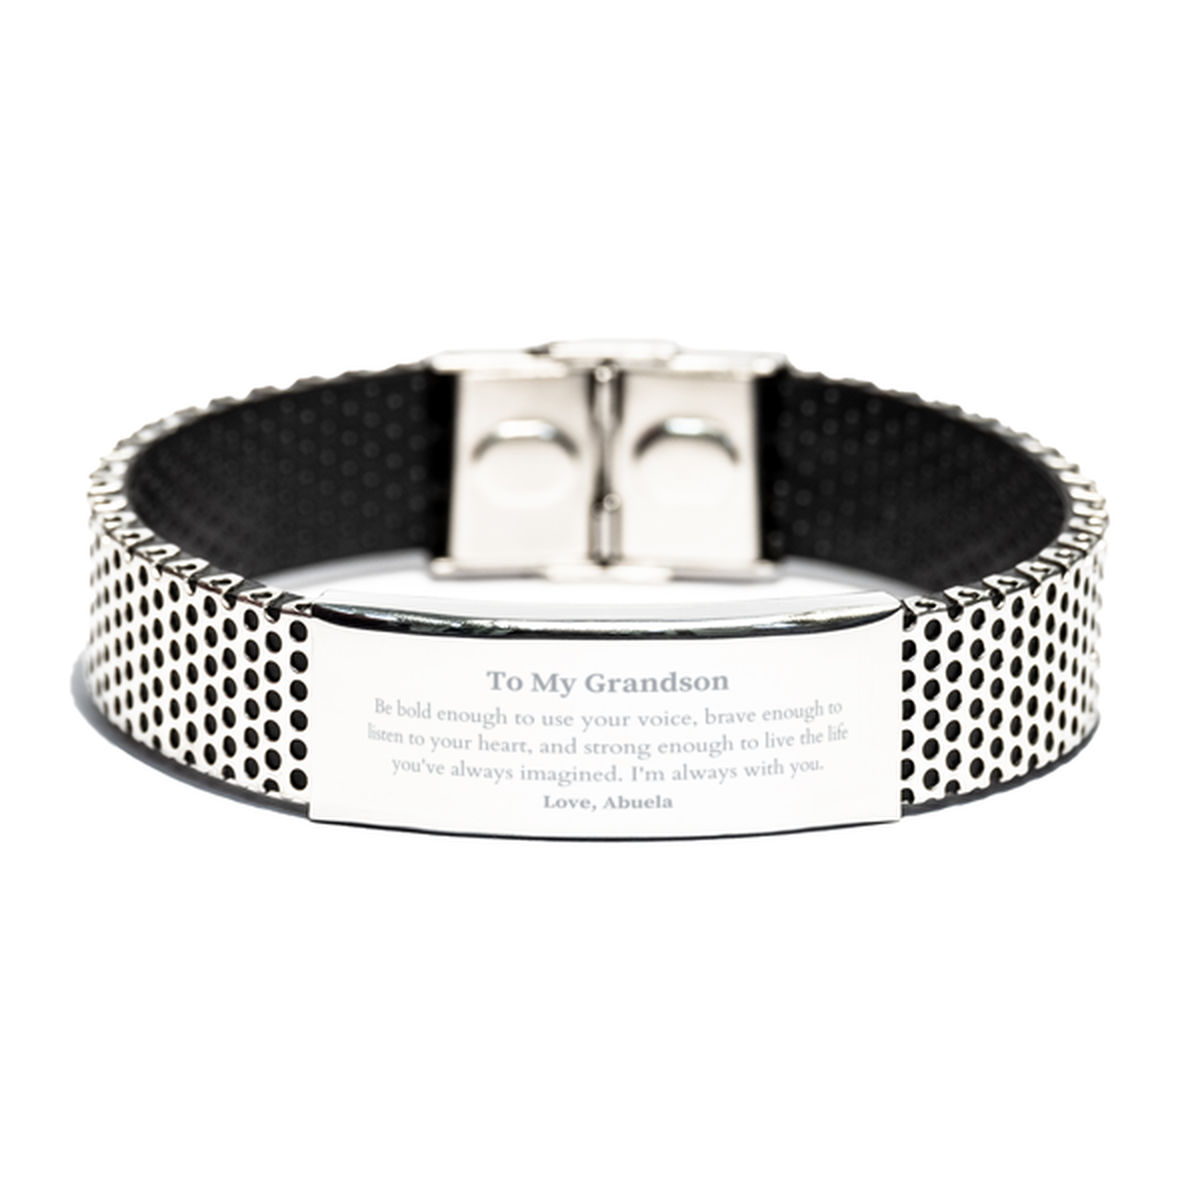 Keepsake Grandson Stainless Steel Bracelet Gift Idea Graduation Christmas Birthday Grandson from Abuela, Grandson Be bold enough to use your voice, brave enough to listen to your heart. Love, Abuela